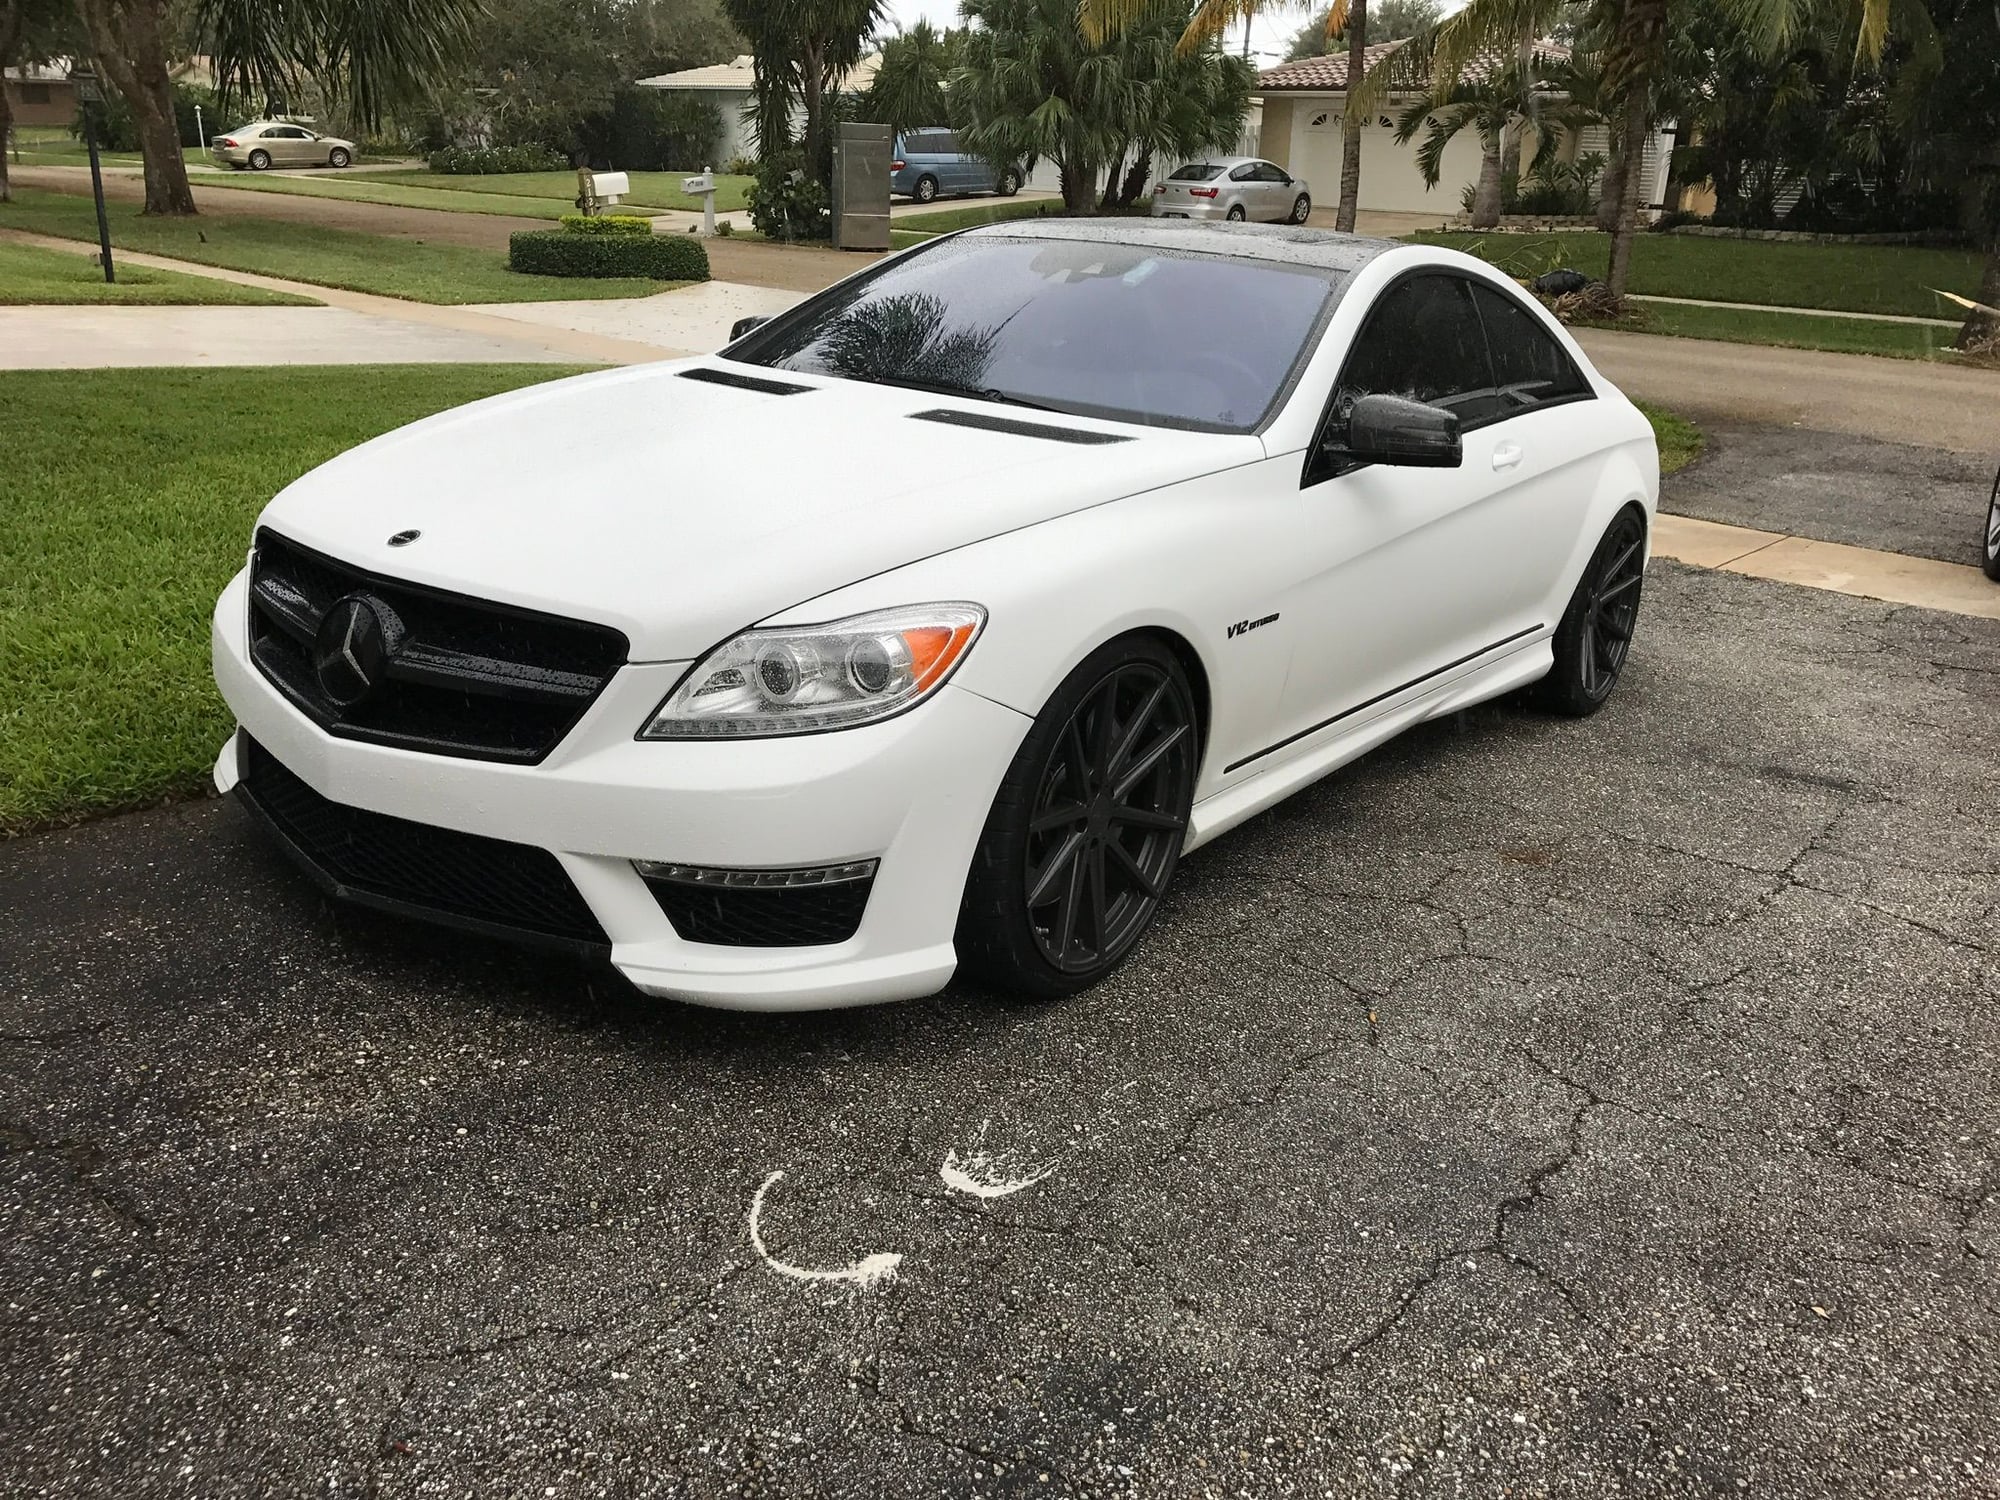 2011 Mercedes-Benz CL65 AMG - 2011 CL65 - Used - VIN Wddej7kb8ba027069 - 60,000 Miles - 12 cyl - 2WD - Automatic - Coupe - Black - Palm Beach, FL 33480, United States